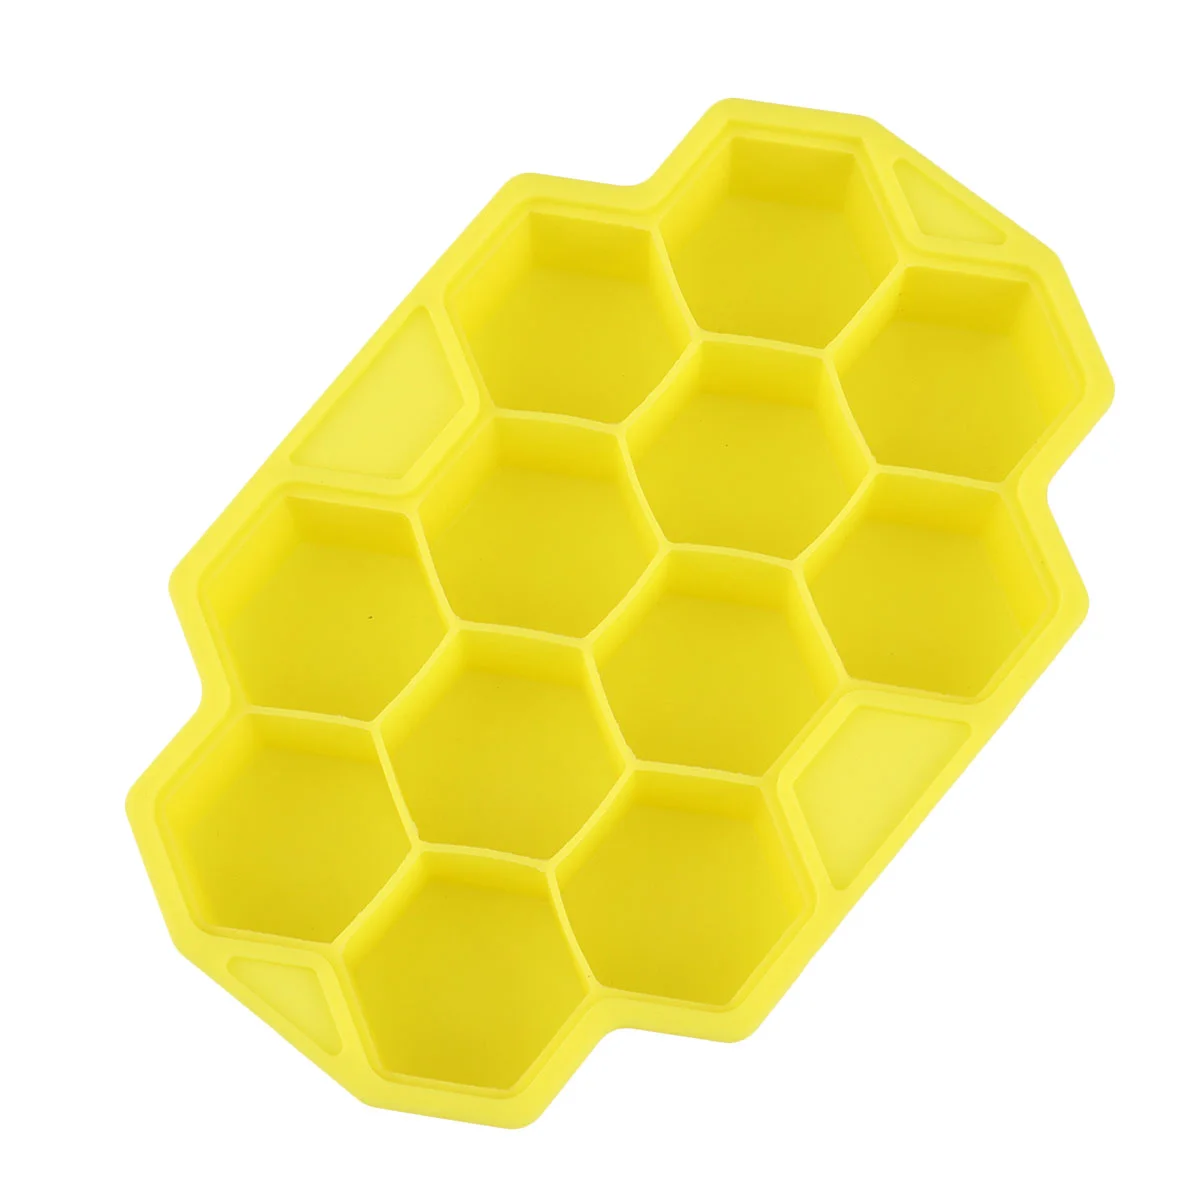 

2 Pcs Ice Cubes Whiskey Grids Mold Maker 13X9 CM Making Mould Honeycomb Shape Yellow Refrigerator